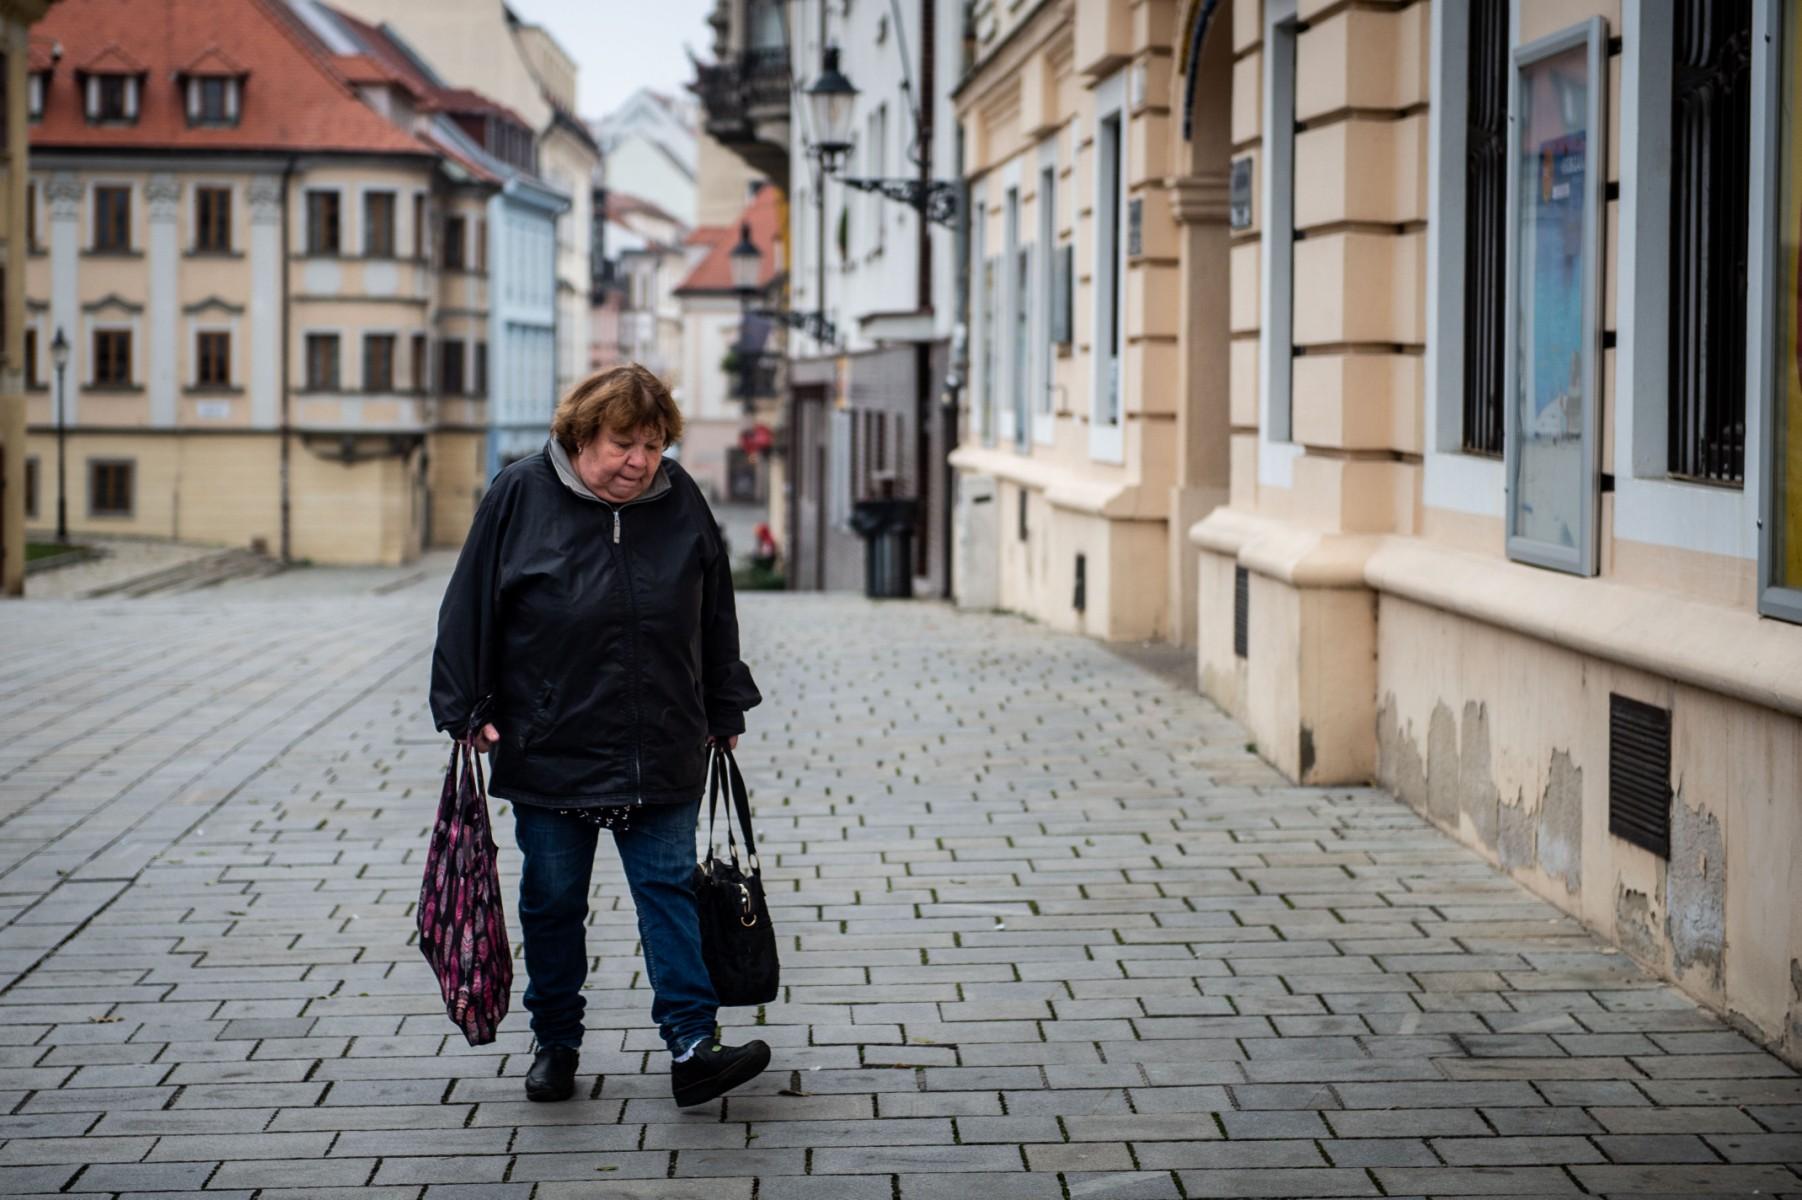 A woman carries shopping bags in downtown Bratislava on Nov 25. Photo: AFP